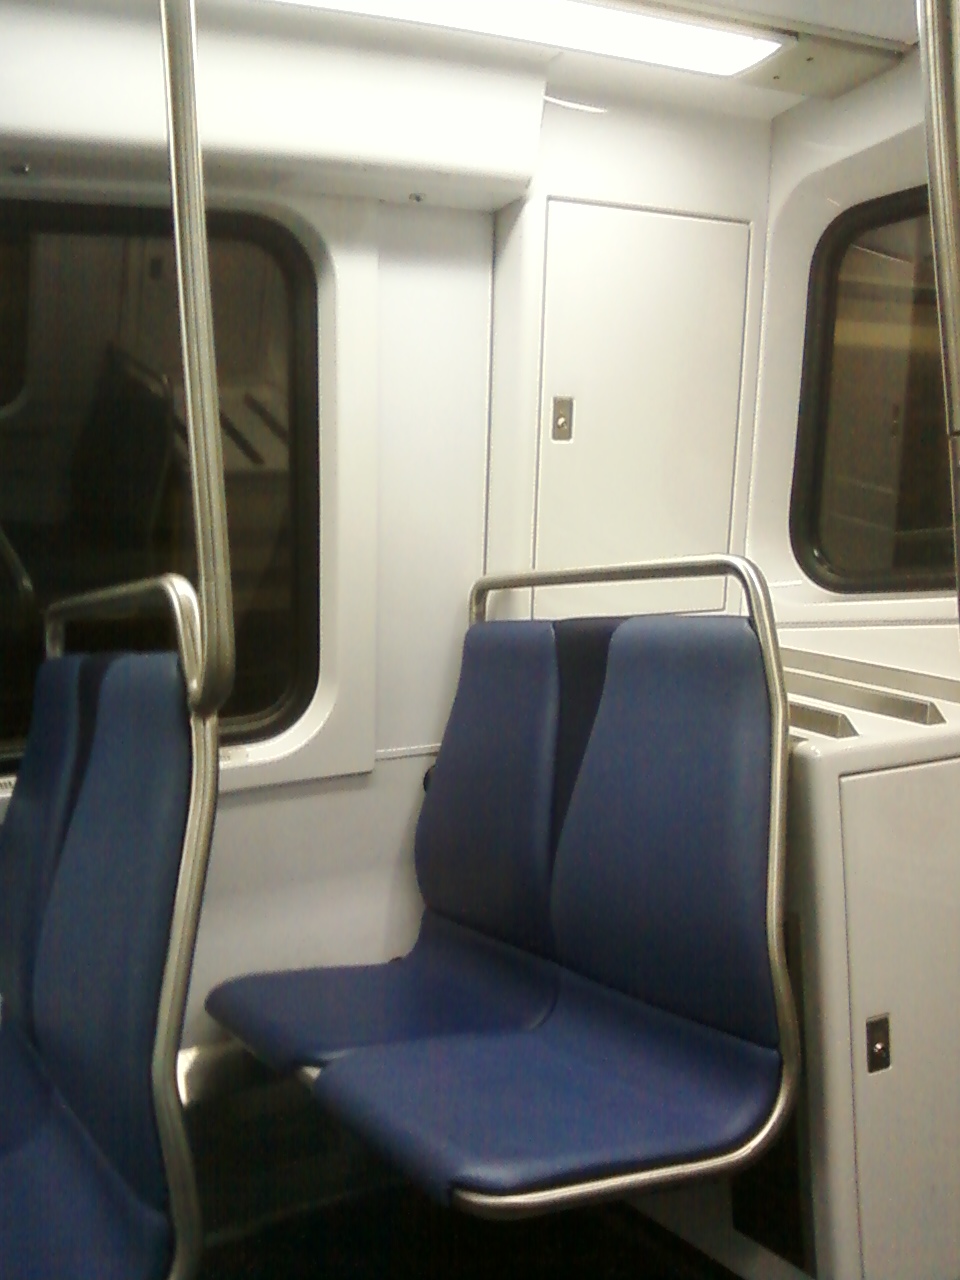 WMATA/DC Metro
7000-series cars end seats, where the 'private section' on an older model
car would be. These are, in fact, just two seats at the end of the car,
offering no privacy or separation from the rest of the car, a bonus
offered on older series cars as a result of how the motorman's cab was
designed. For further details, please visit www.wirelessnotes.org.